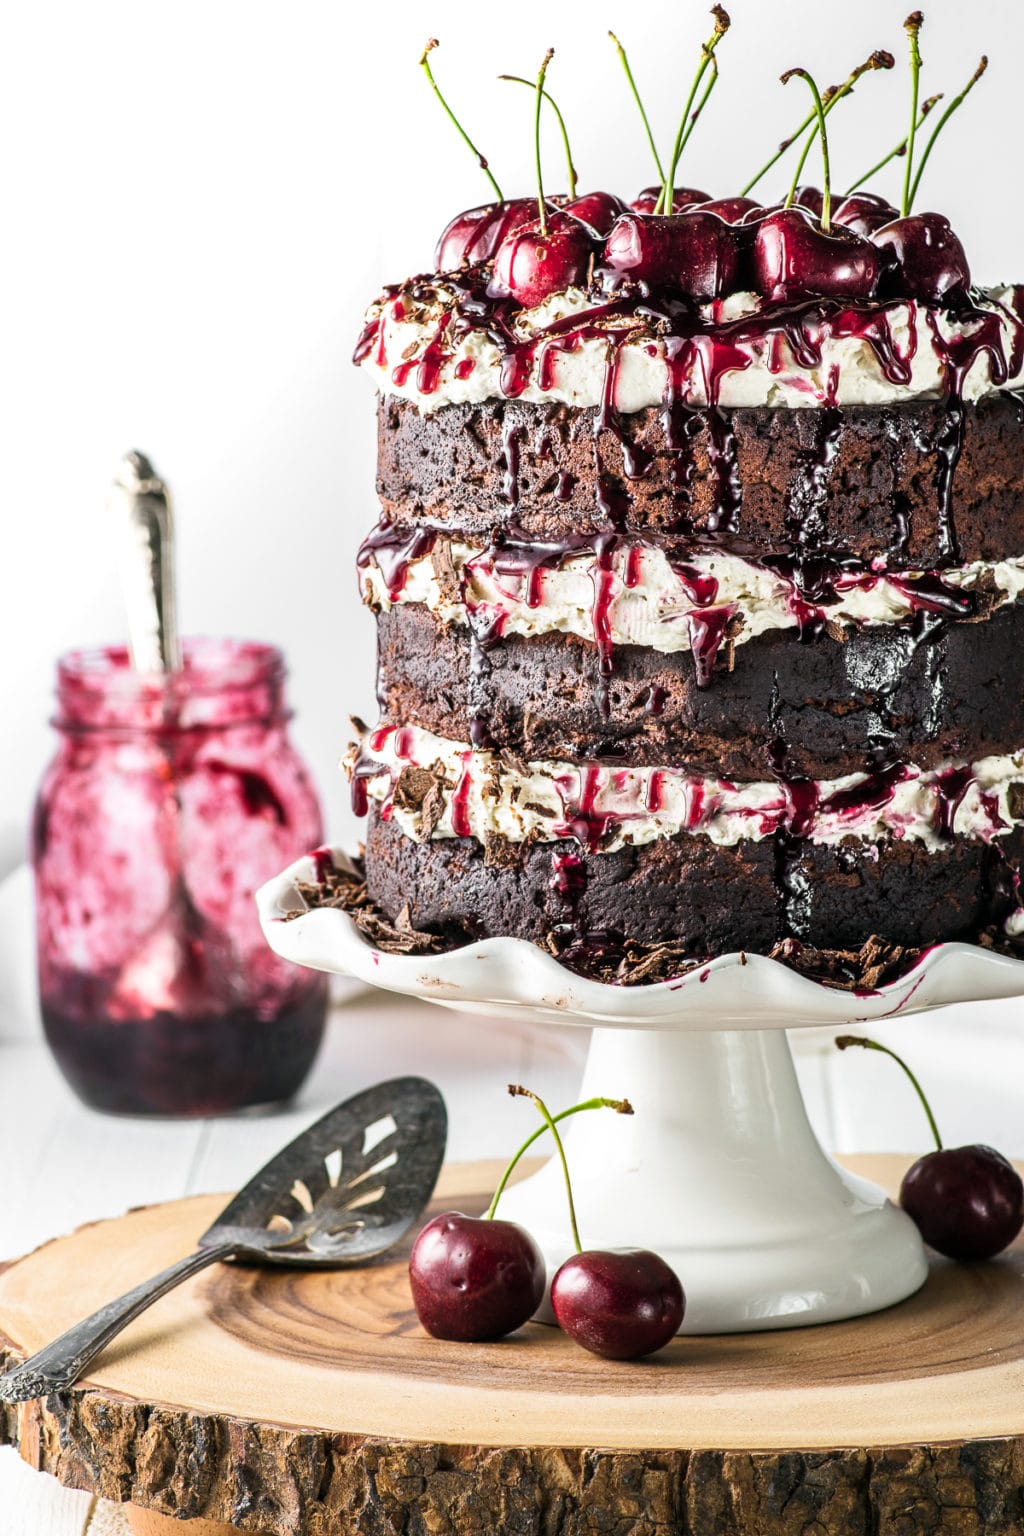 A tall triple layer gluten-free black forest cake topped with whipped cream frosting and fresh cherries dripping cherry filling against a white background